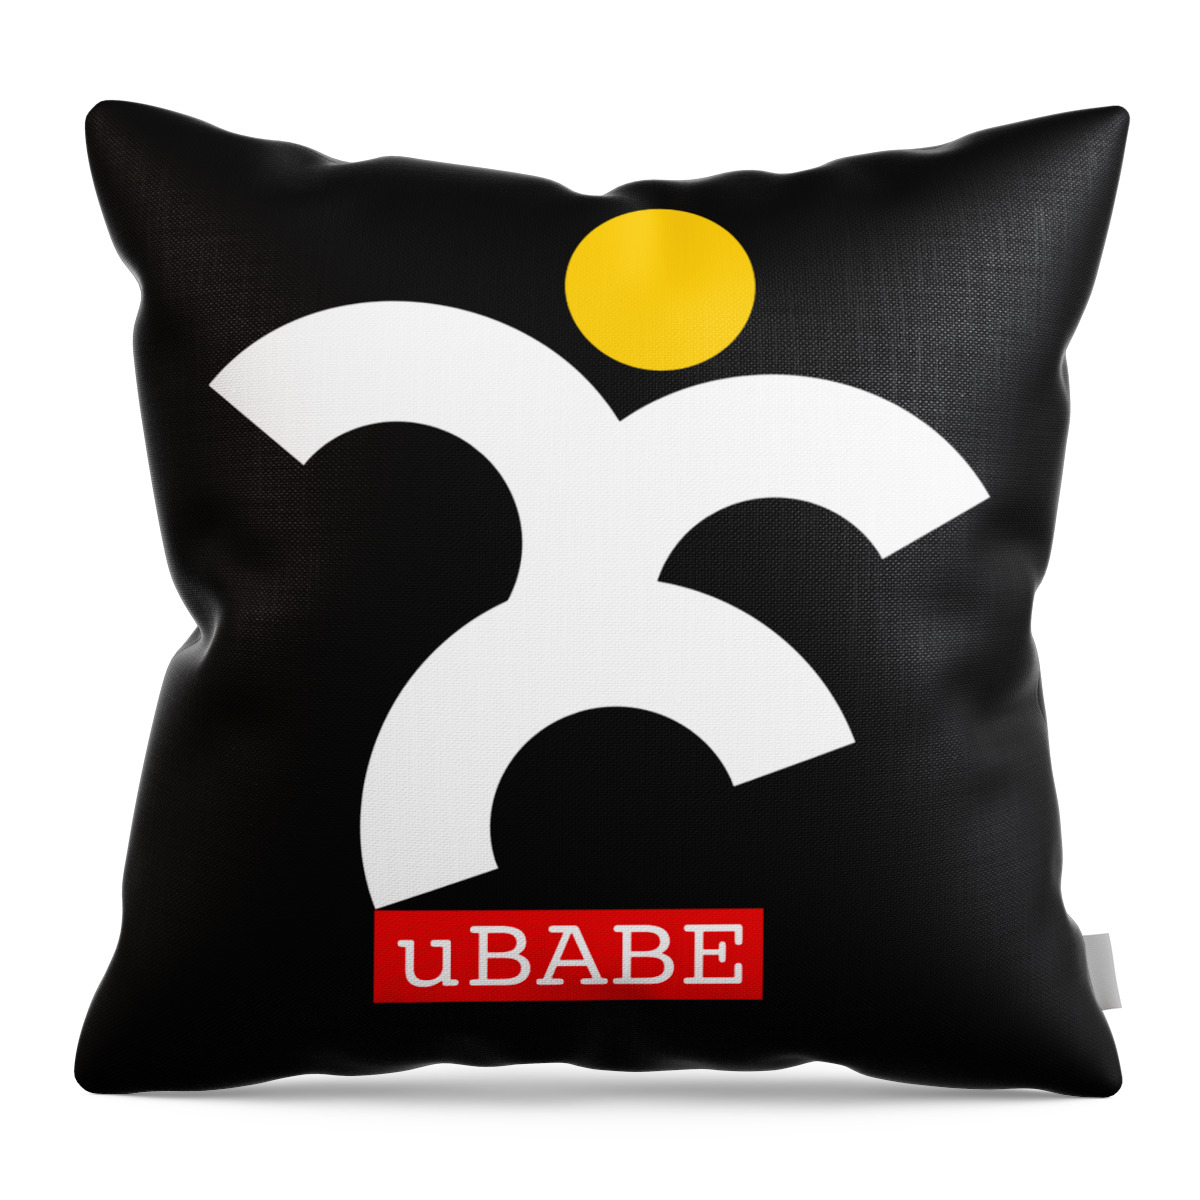 Dance Throw Pillow featuring the digital art Jive Babe by Ubabe Style